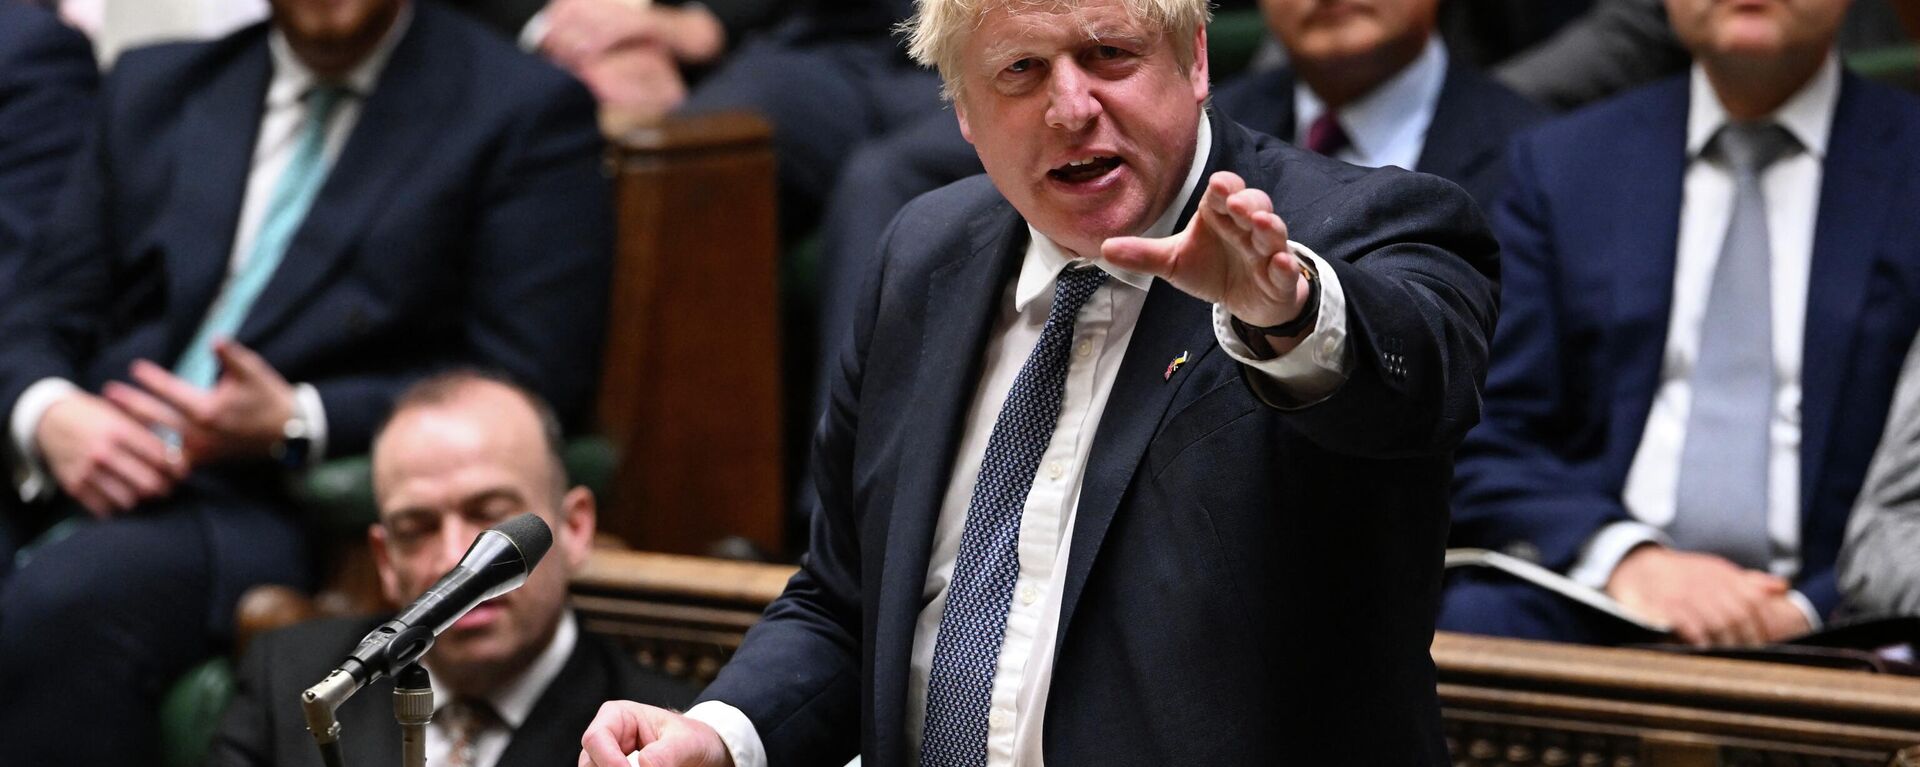 A handout photograph released by the UK Parliament shows Britain's Prime Minister Boris Johnson speaking during the first day of a debate on the Queen's Speech, in the House of Commons, in London, on May 10, 2022 - Sputnik International, 1920, 28.05.2022